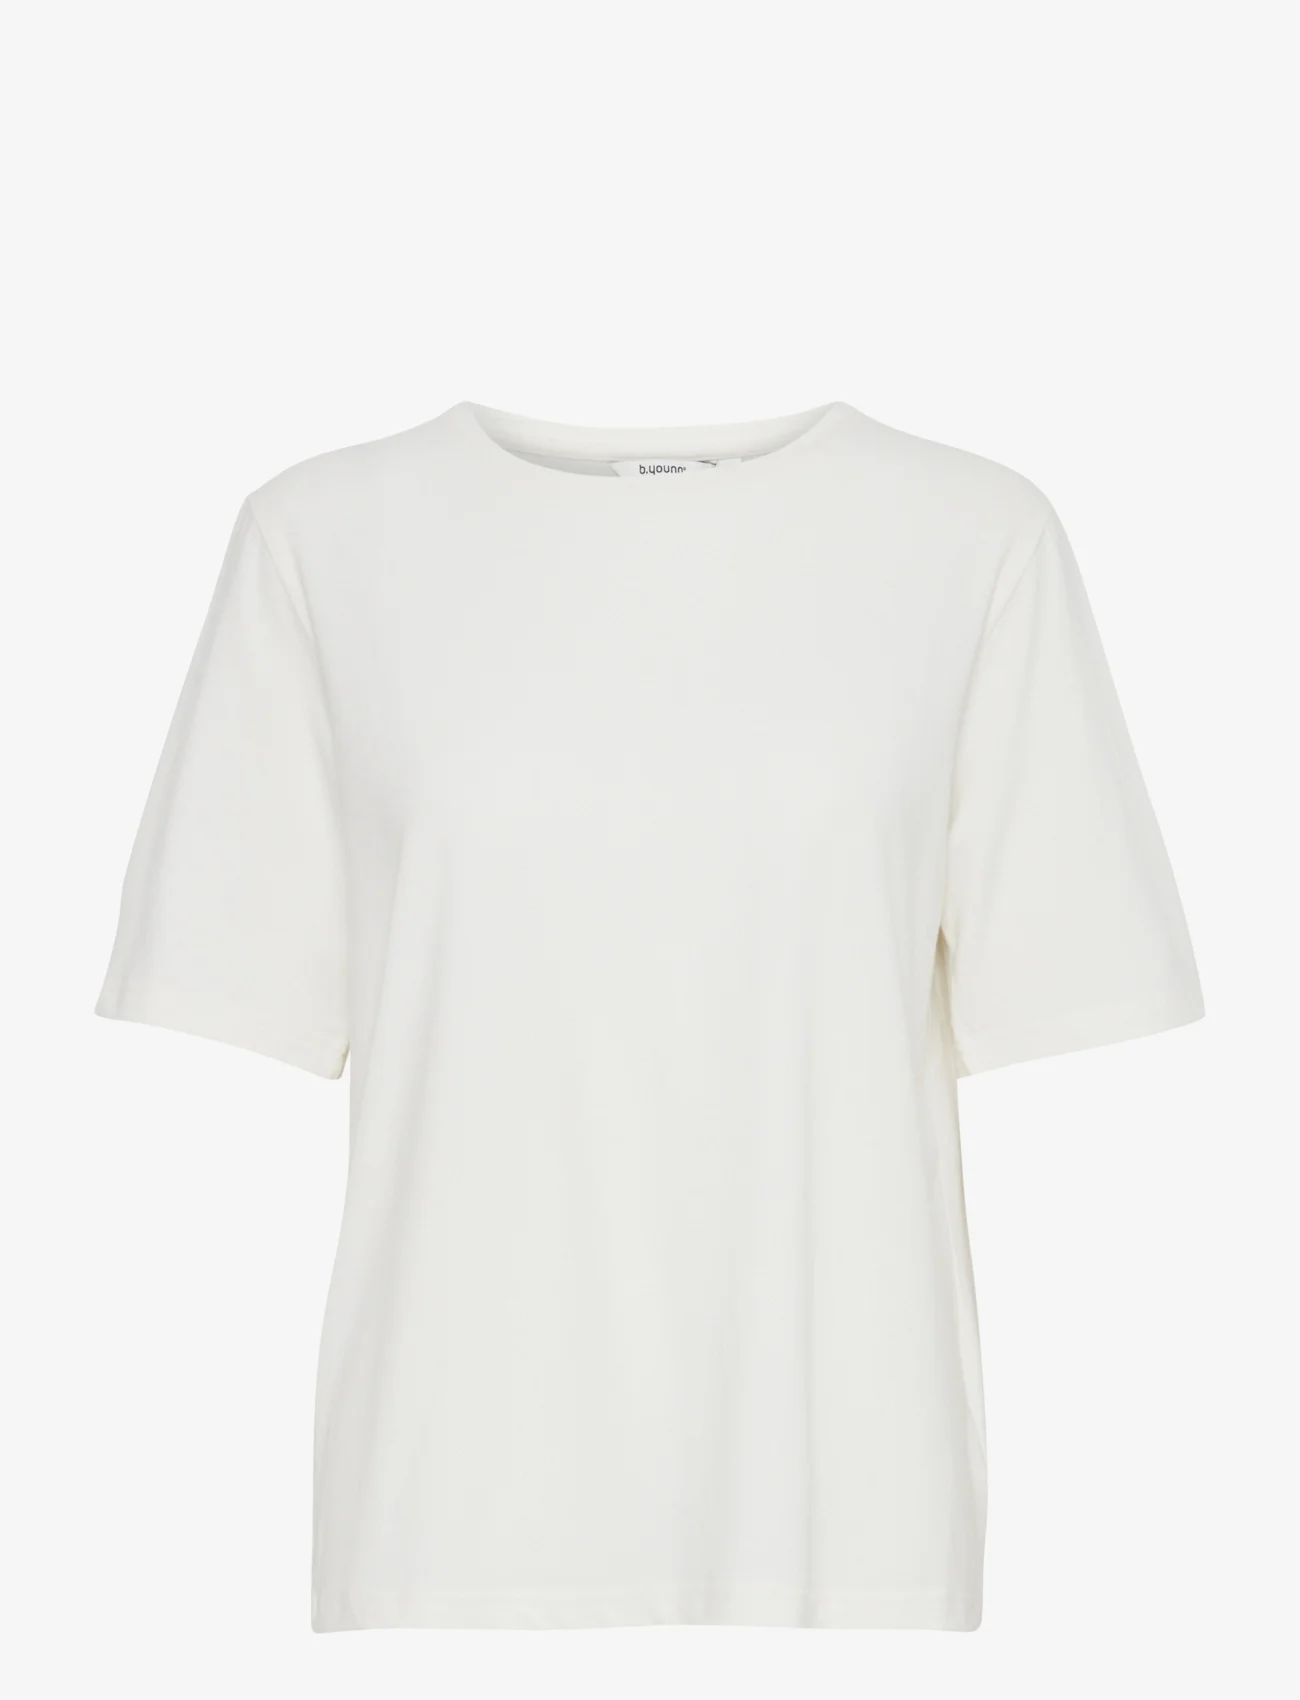 b.young - BYPAMILA HALF SL TSHIRT 2 - - lowest prices - off white - 0